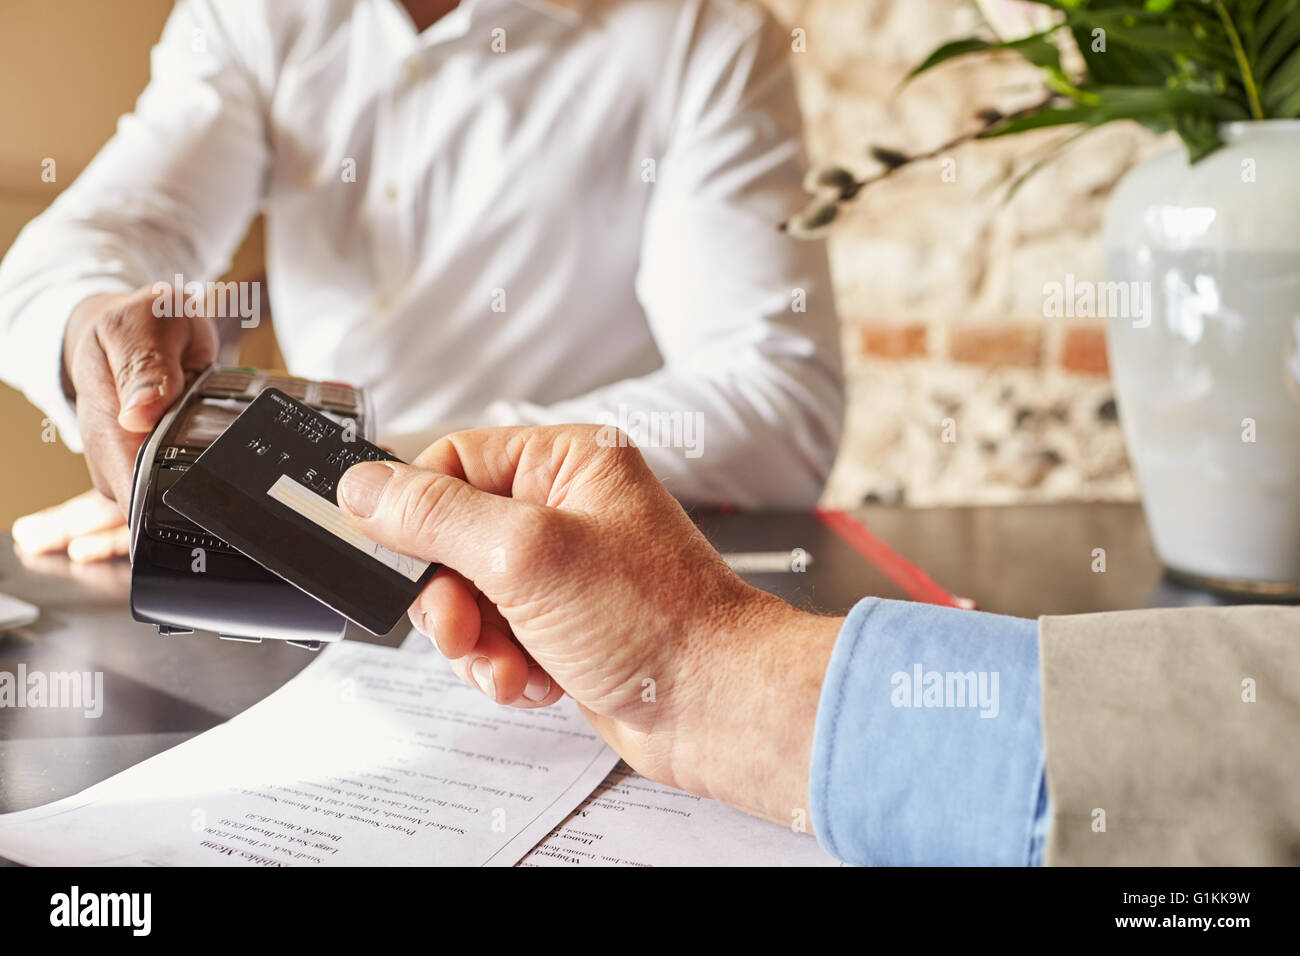 Guest making contactless card payment at hotel, hands detail Stock Photo